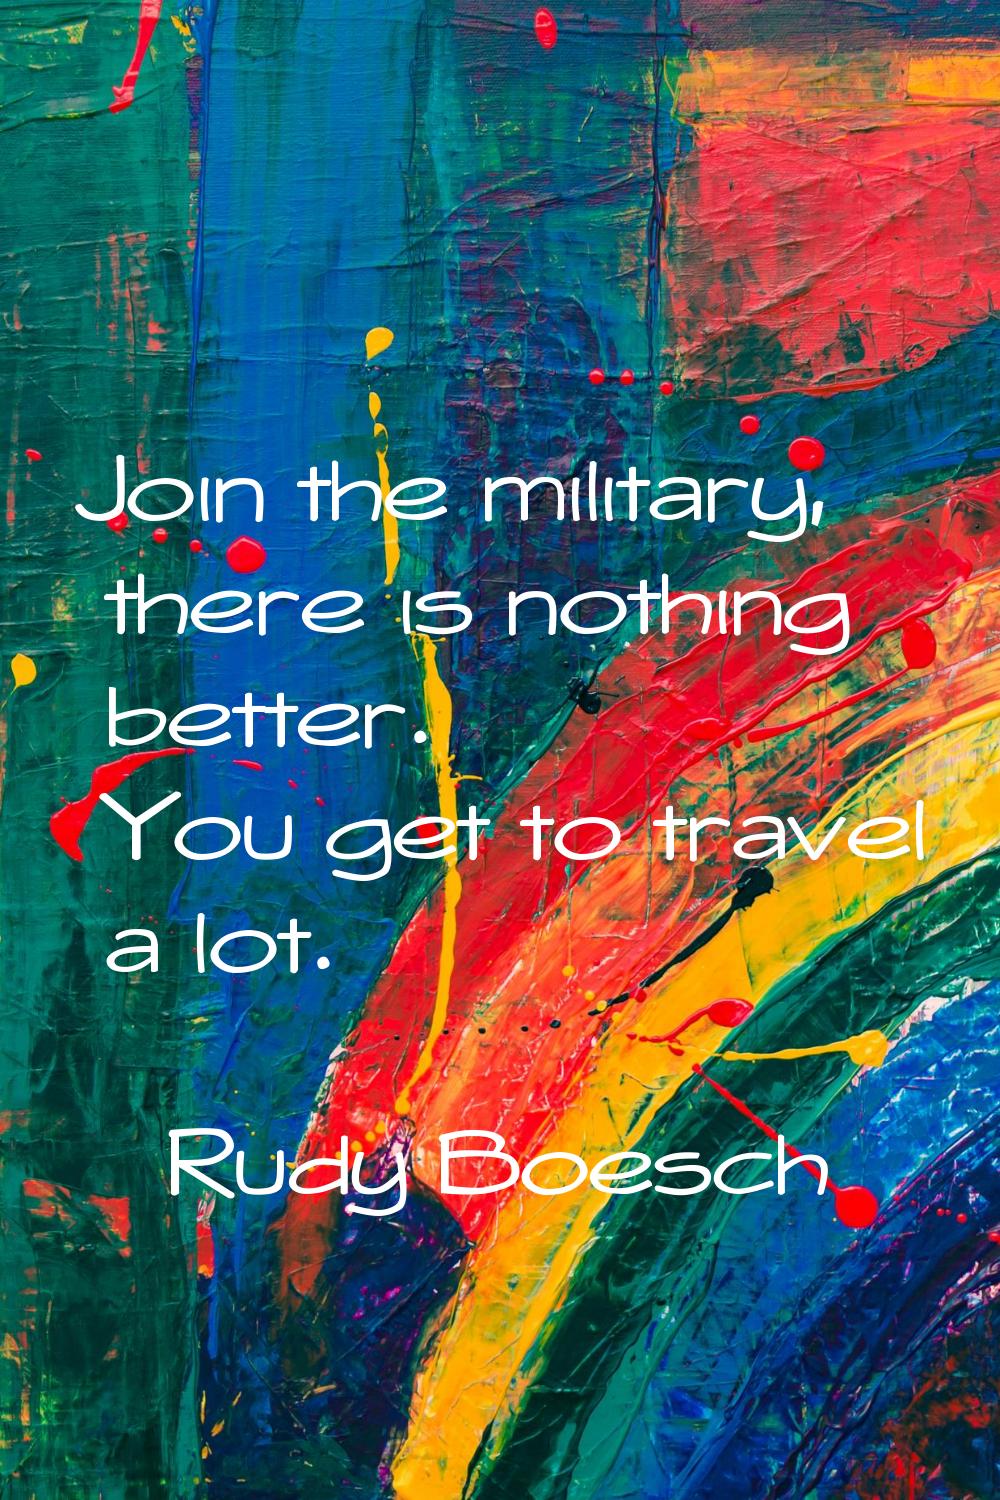 Join the military, there is nothing better. You get to travel a lot.